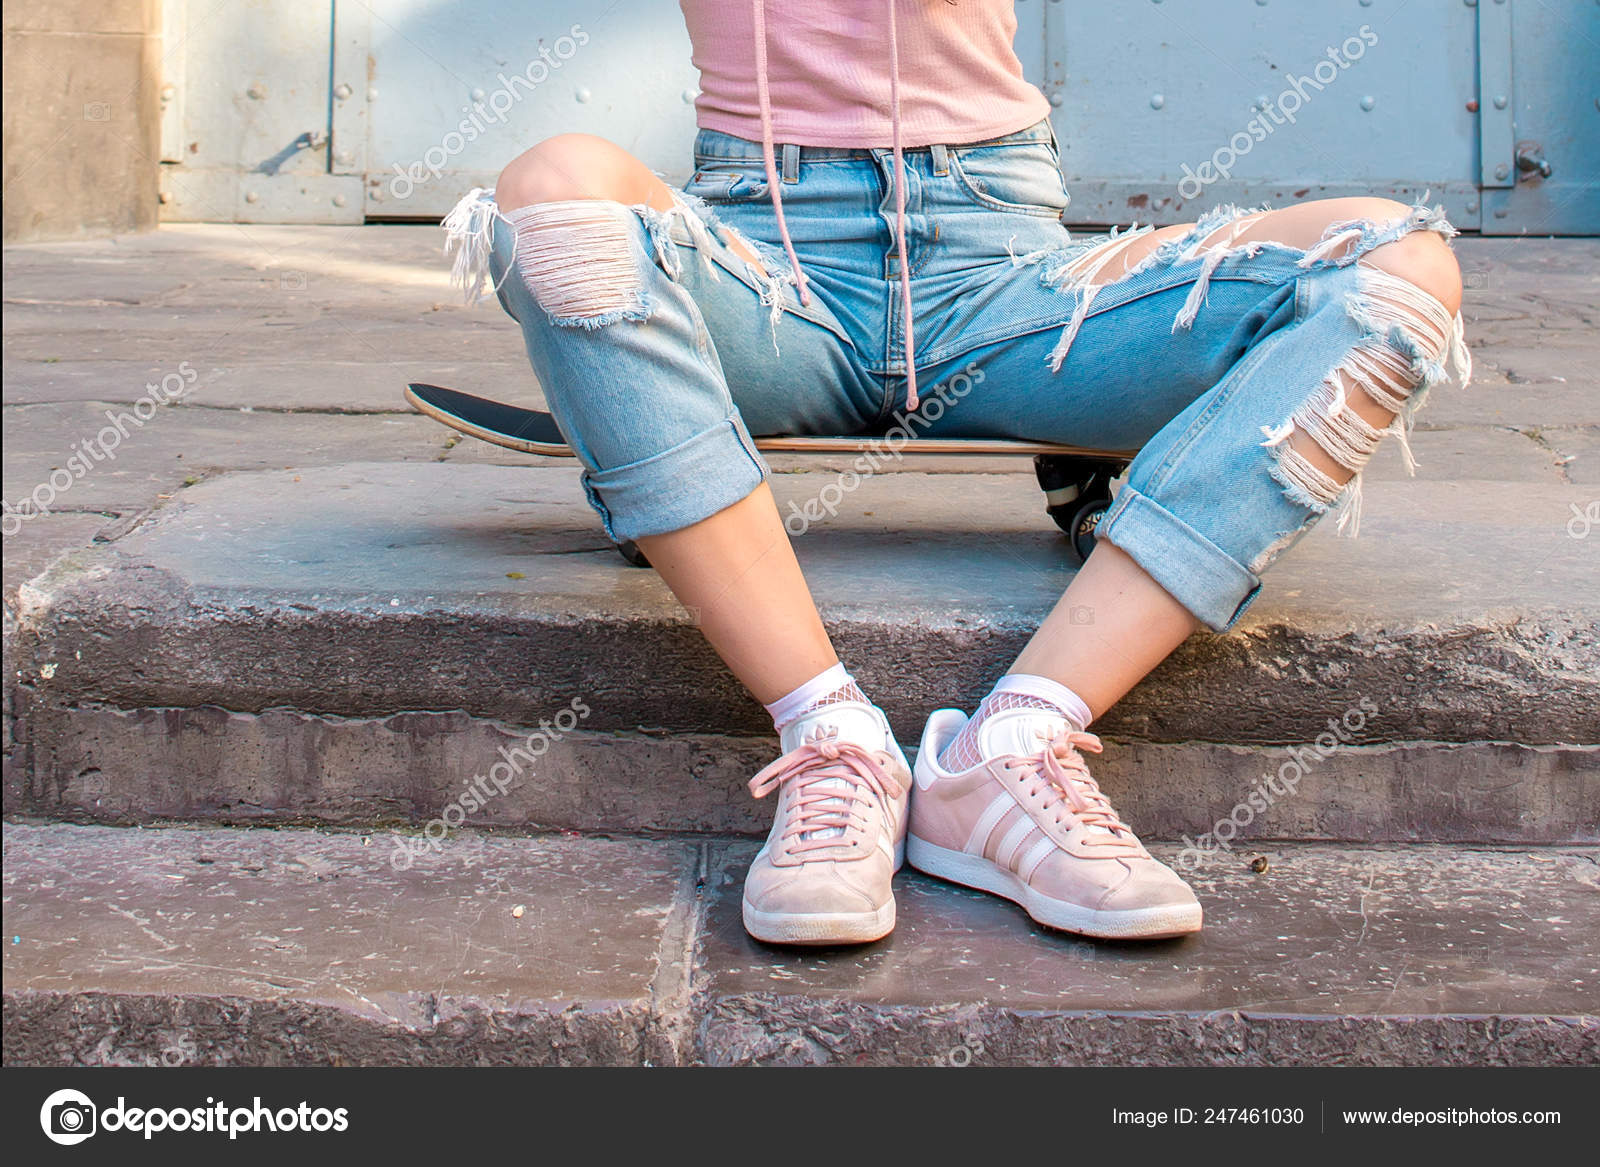 pink adidas shoes outfit